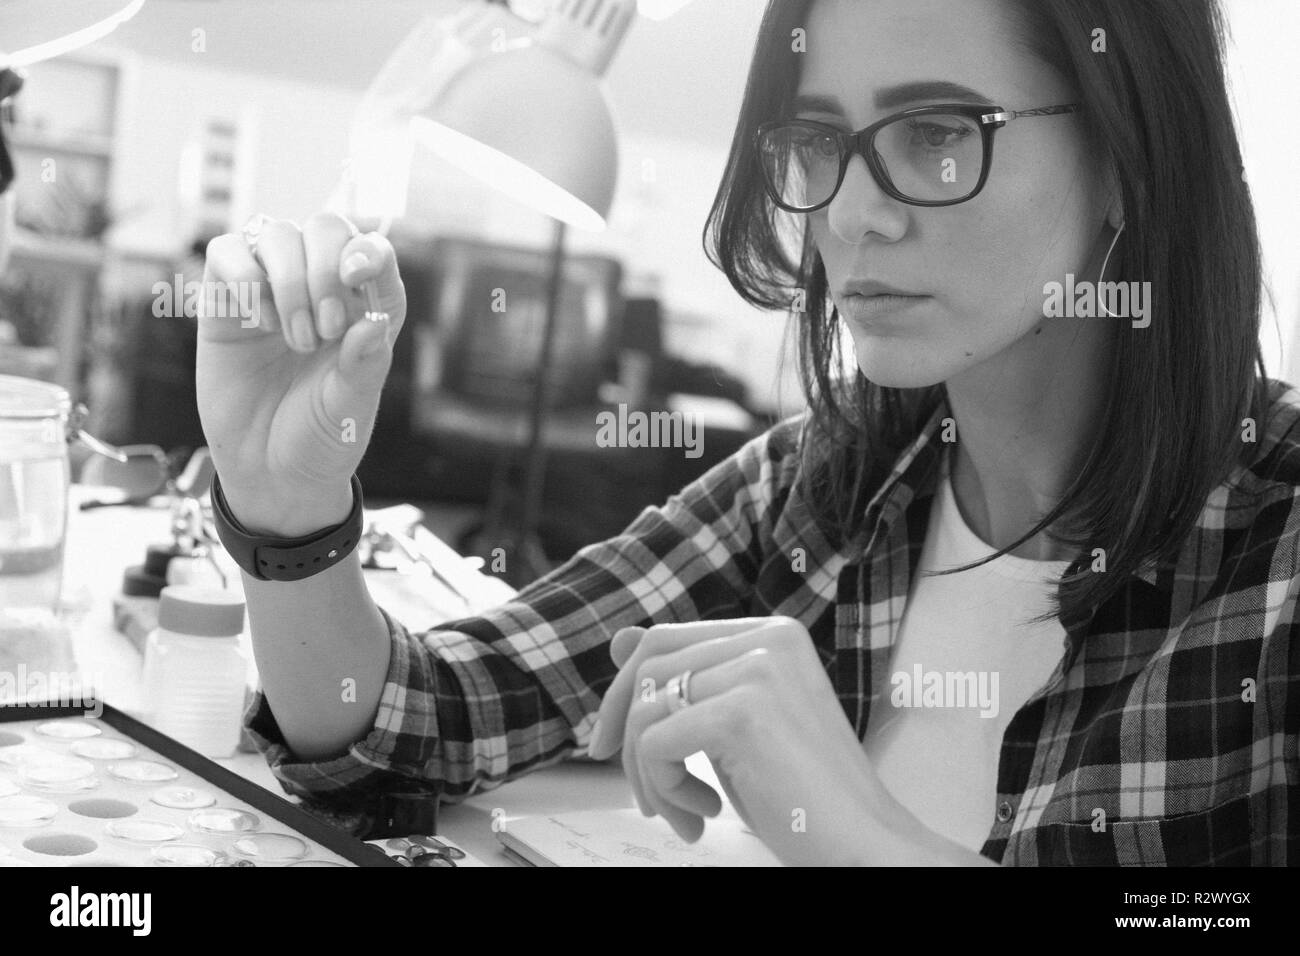 Jeweler at work, crafting in a jewelry workshop. Stock Photo